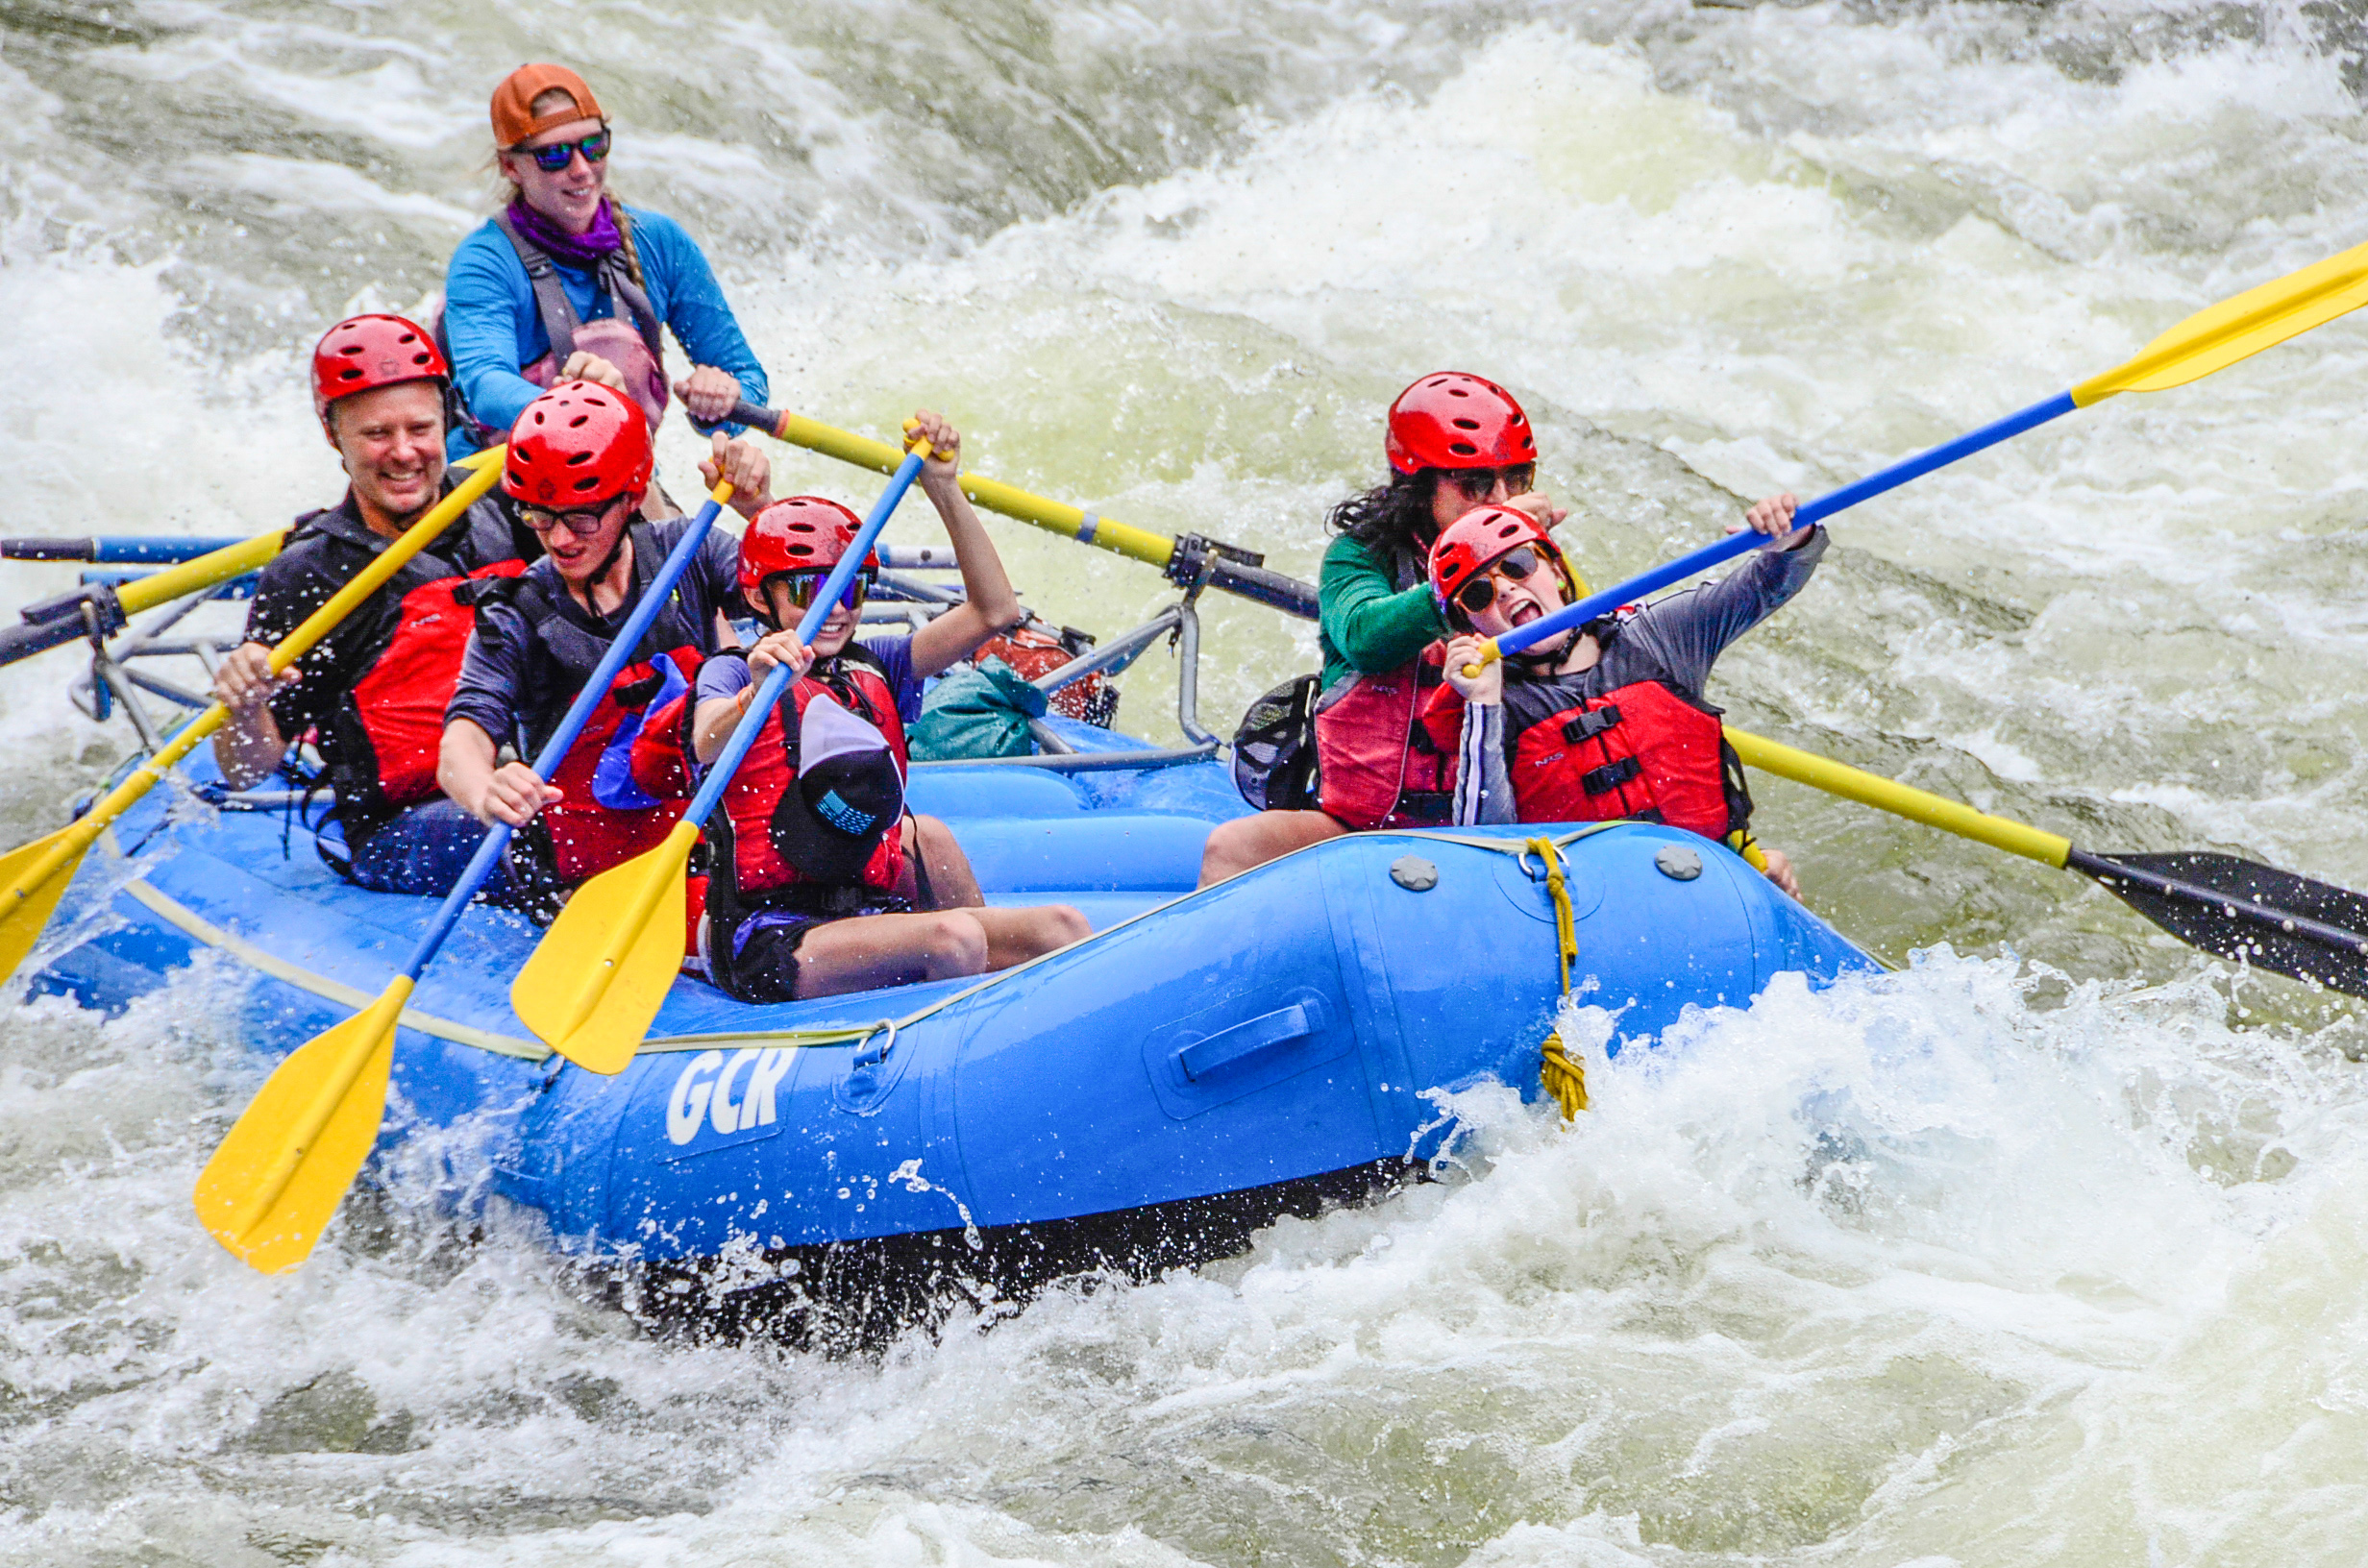 In this captivating image, a guide expertly navigates a full boat of guests through the exhilarating Shoshone Rapids. Adorned in essential safety gear, including life jackets and helmets, the group paddles together, showcasing teamwork and skill as they conquer the rapids.